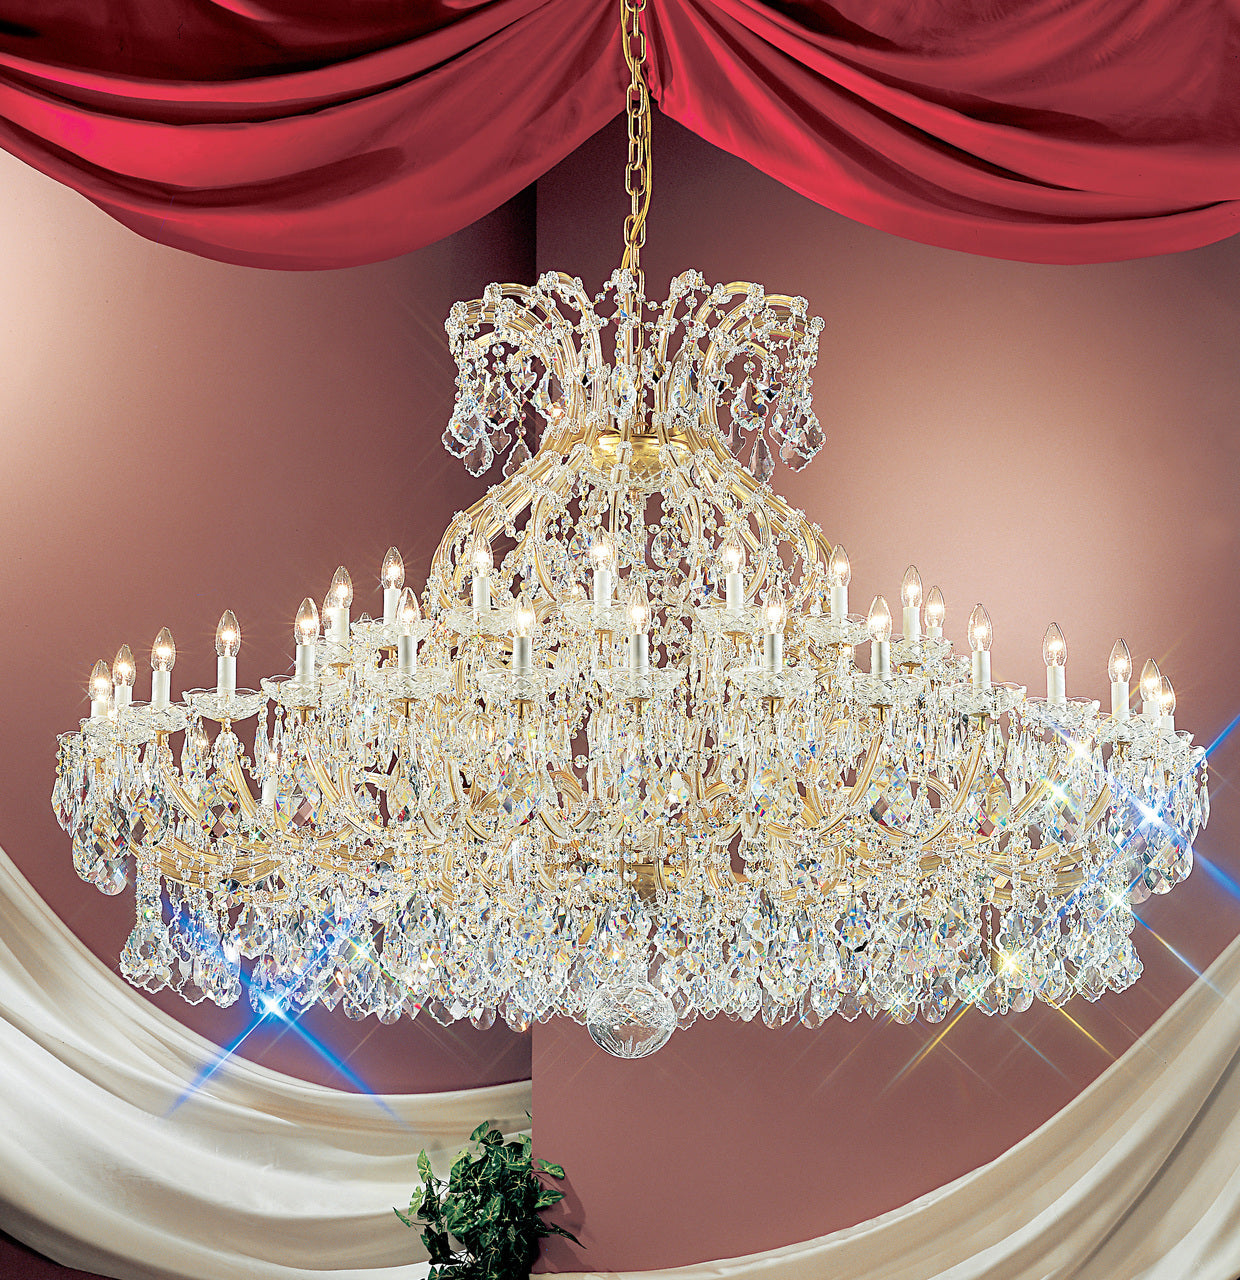 Classic Lighting 8168 OWG C Maria Theresa Traditional Crystal Chandelier in Olde World Gold (Imported from Italy)